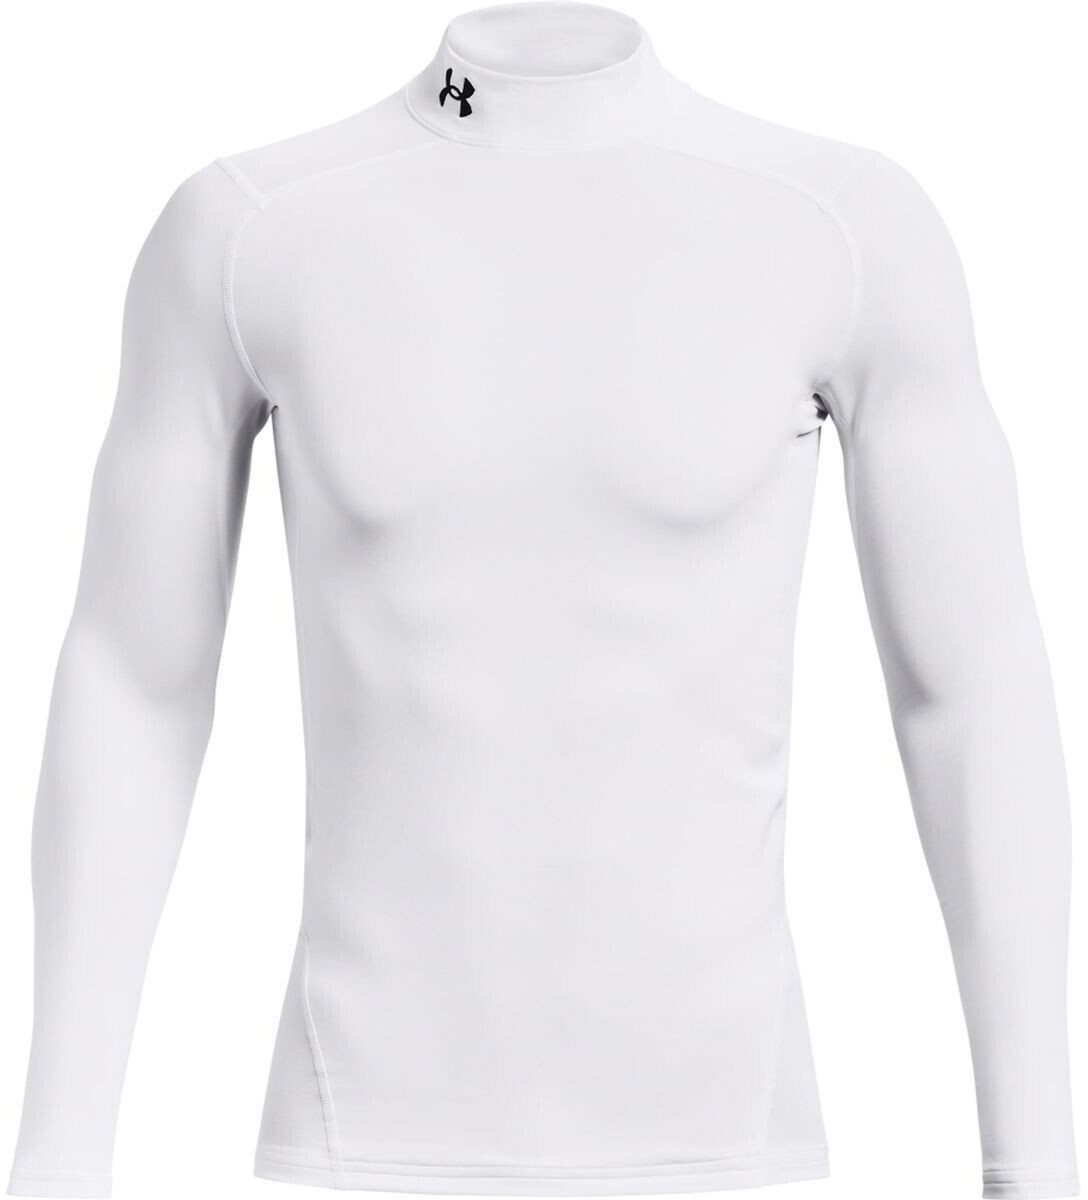 – Buy Armour Mock Compression Under from ColdGear (1366072) Armour Best on £26.00 Deals (Today)